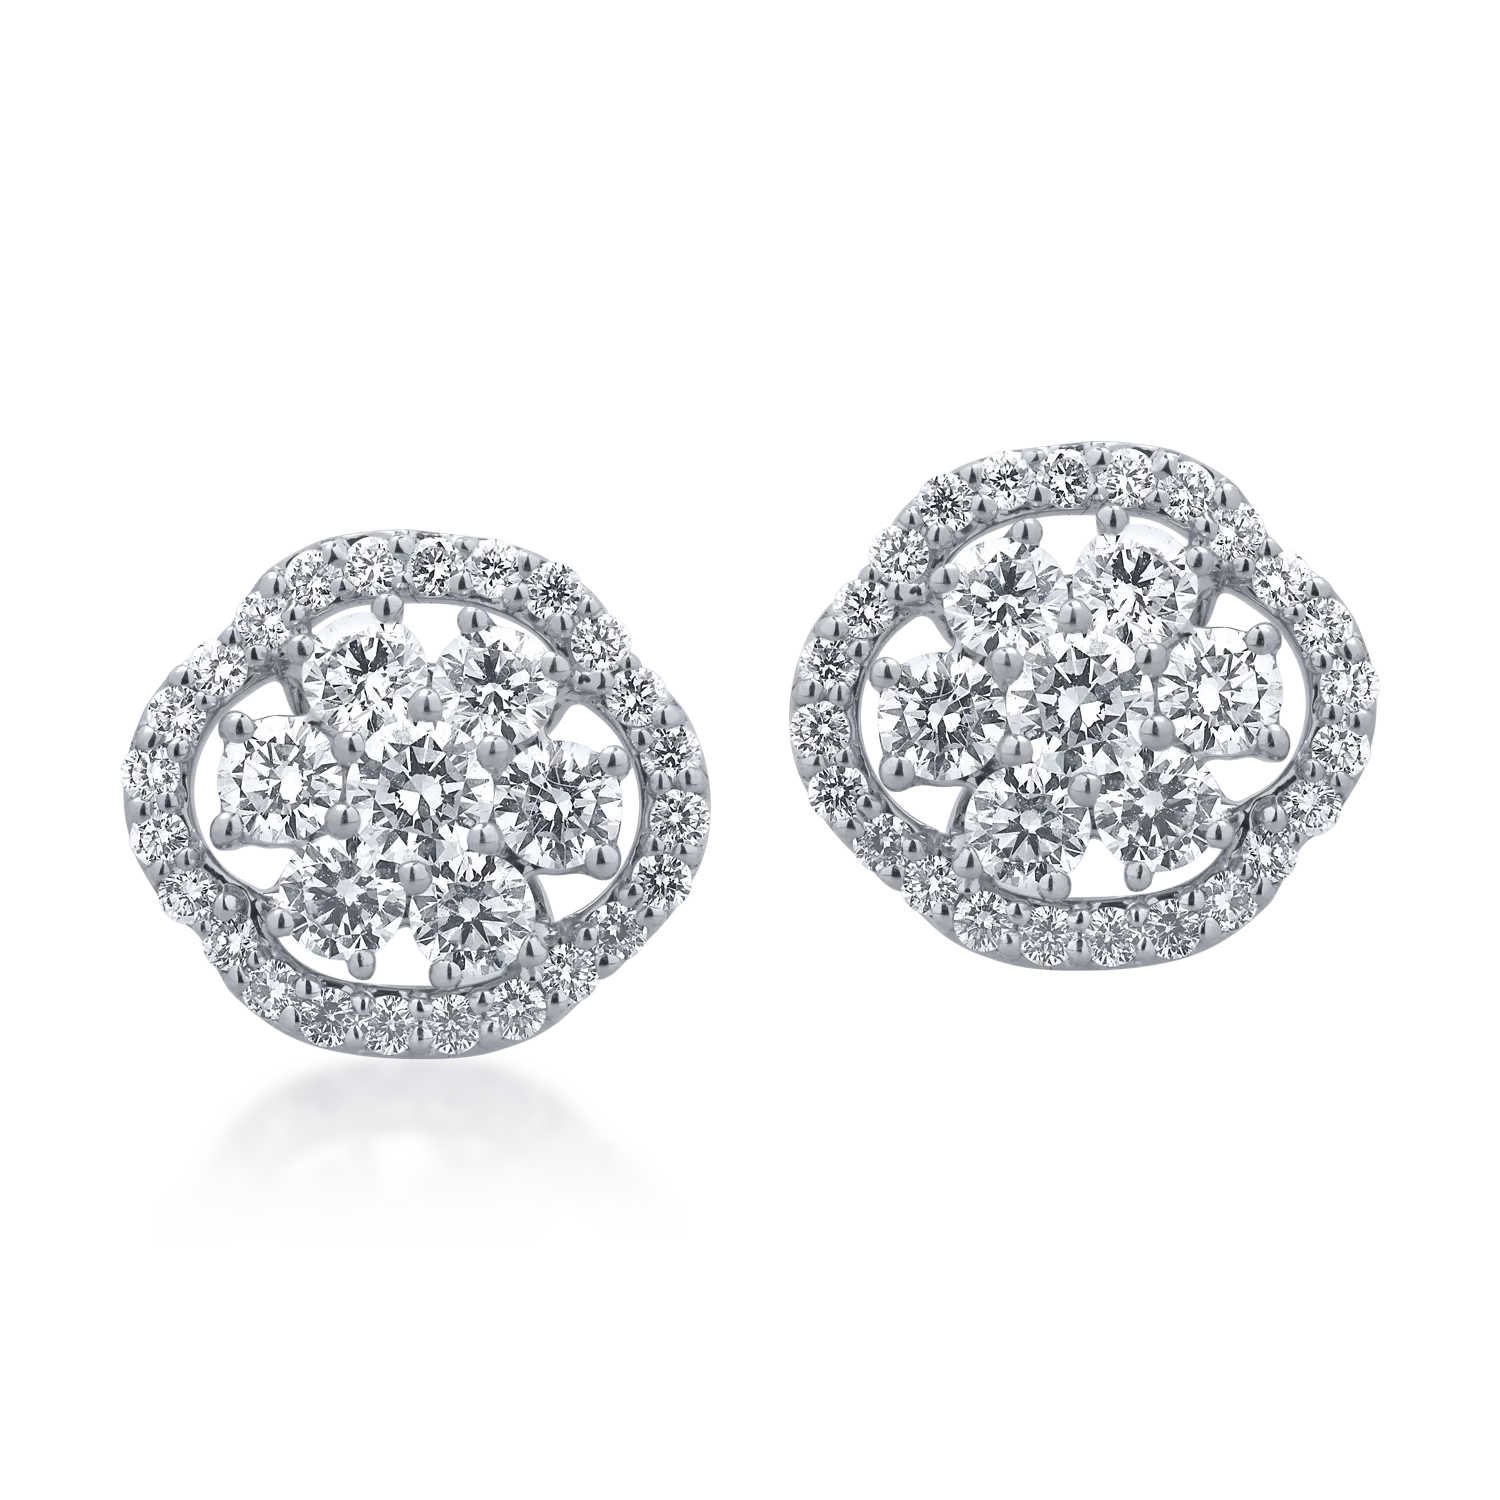 18K white gold earrings with 1.82ct diamonds